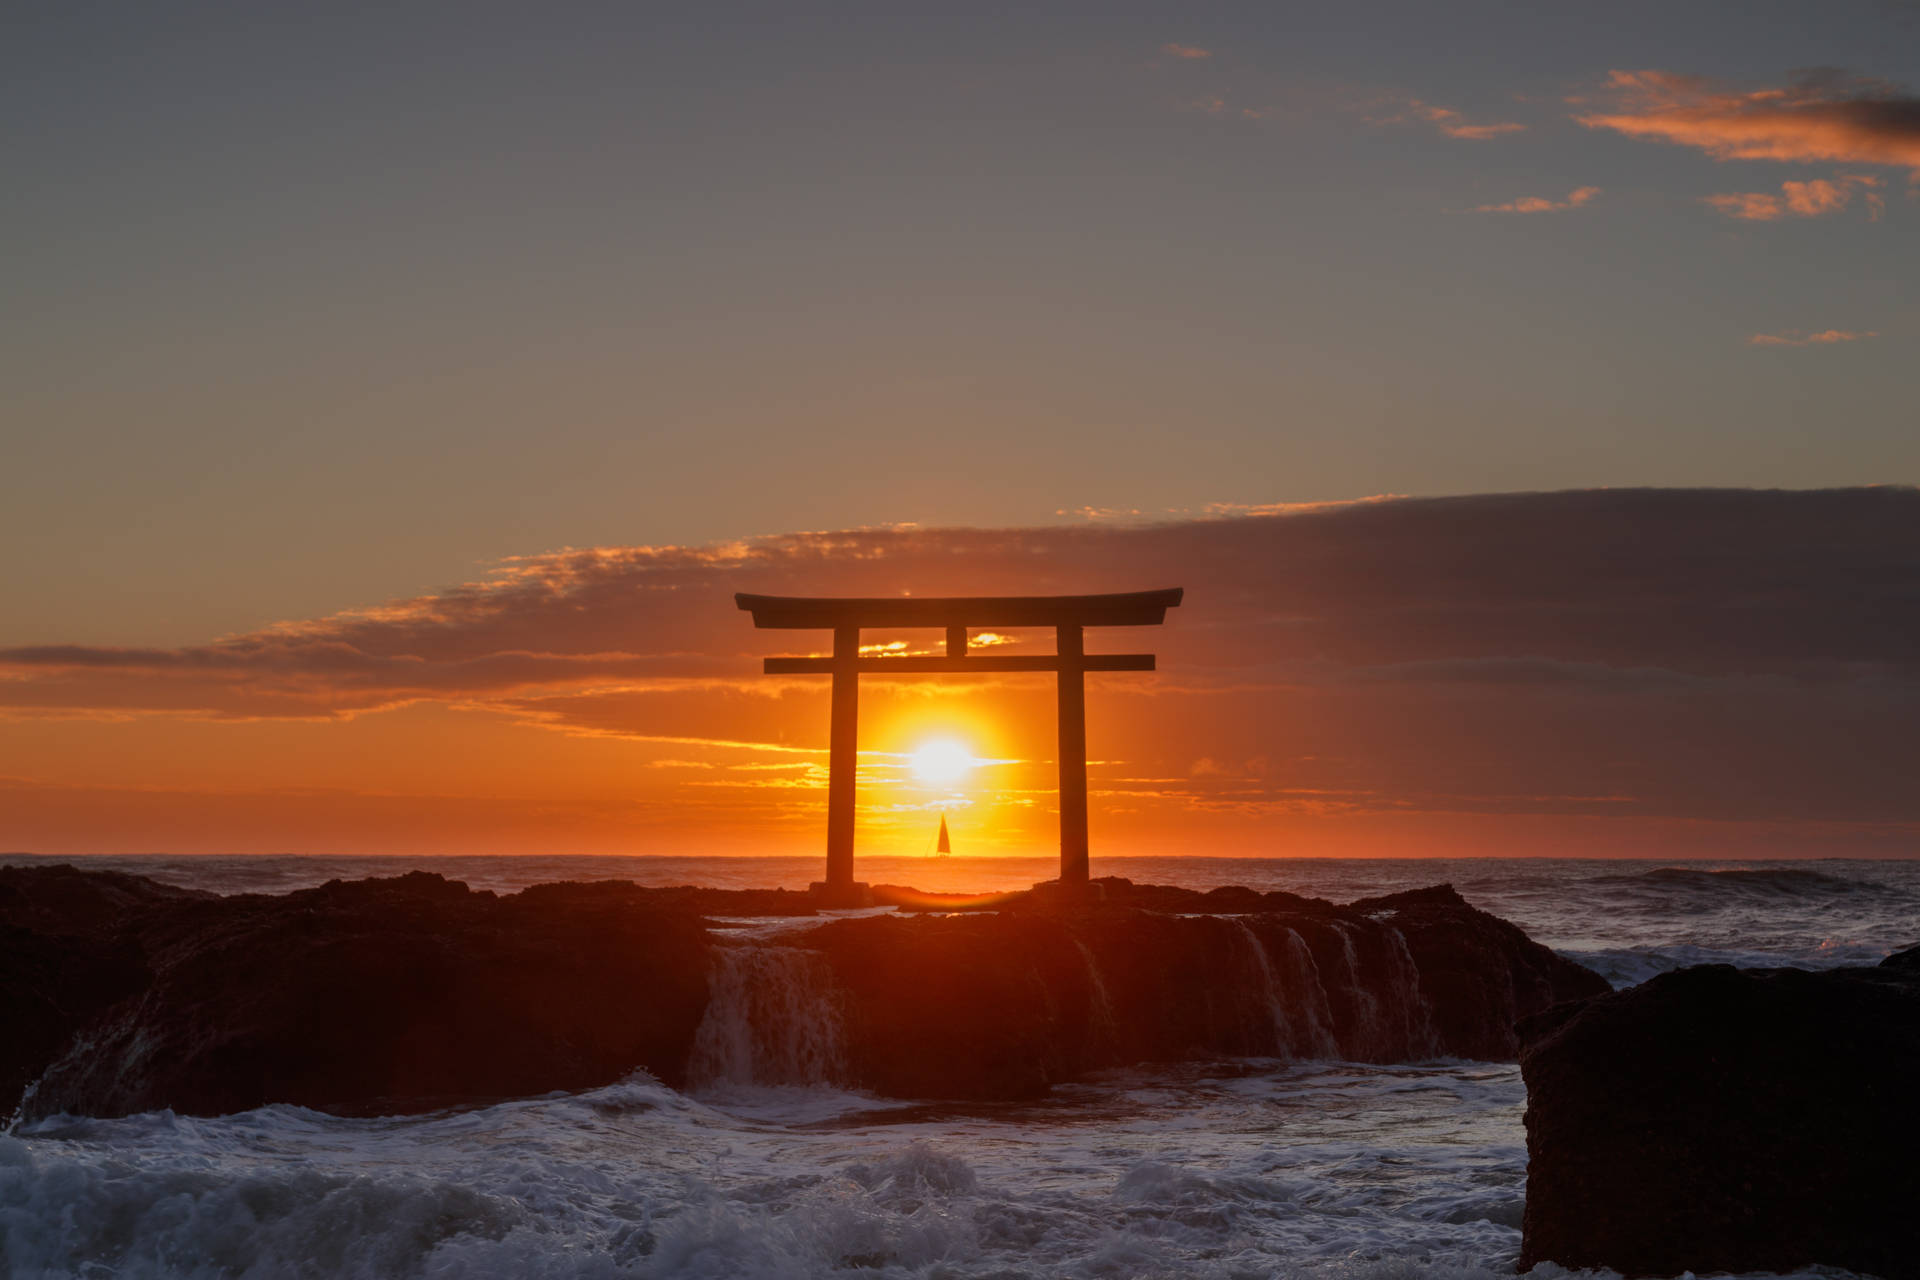 “a Symbol Of Shinto Spirituality - A Unesco World Heritage Site: The Torii Gate At Fushimi Inari Shrine In Japan” Background